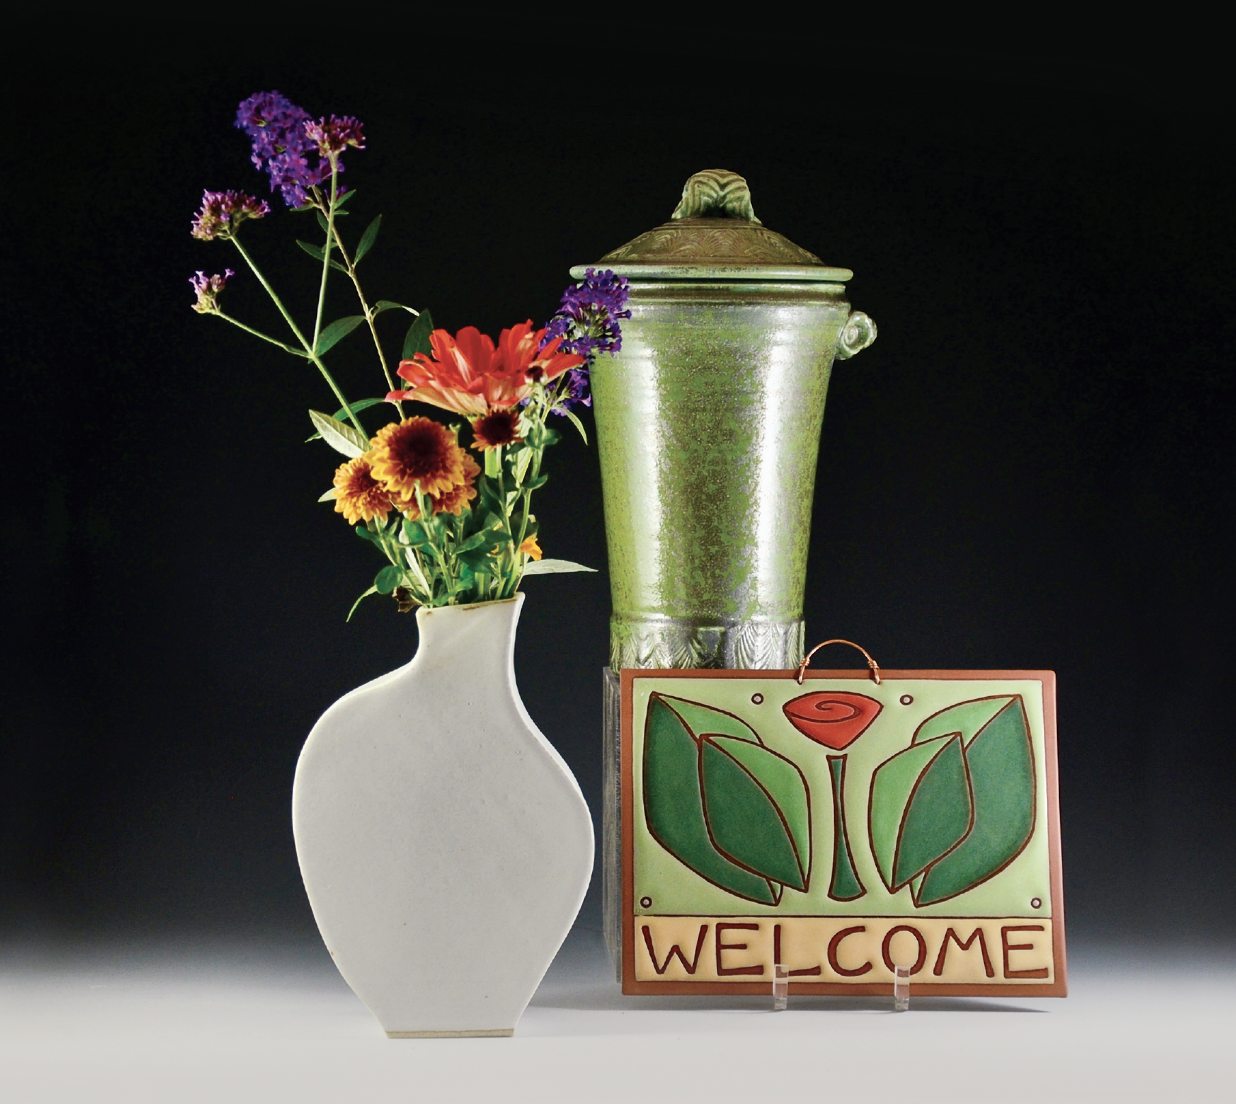 Left to right: Evelyn LaMers’ stoneware vase, Janet Murie’s stoneware covered jar, Kate Lally’s earthenware tile.